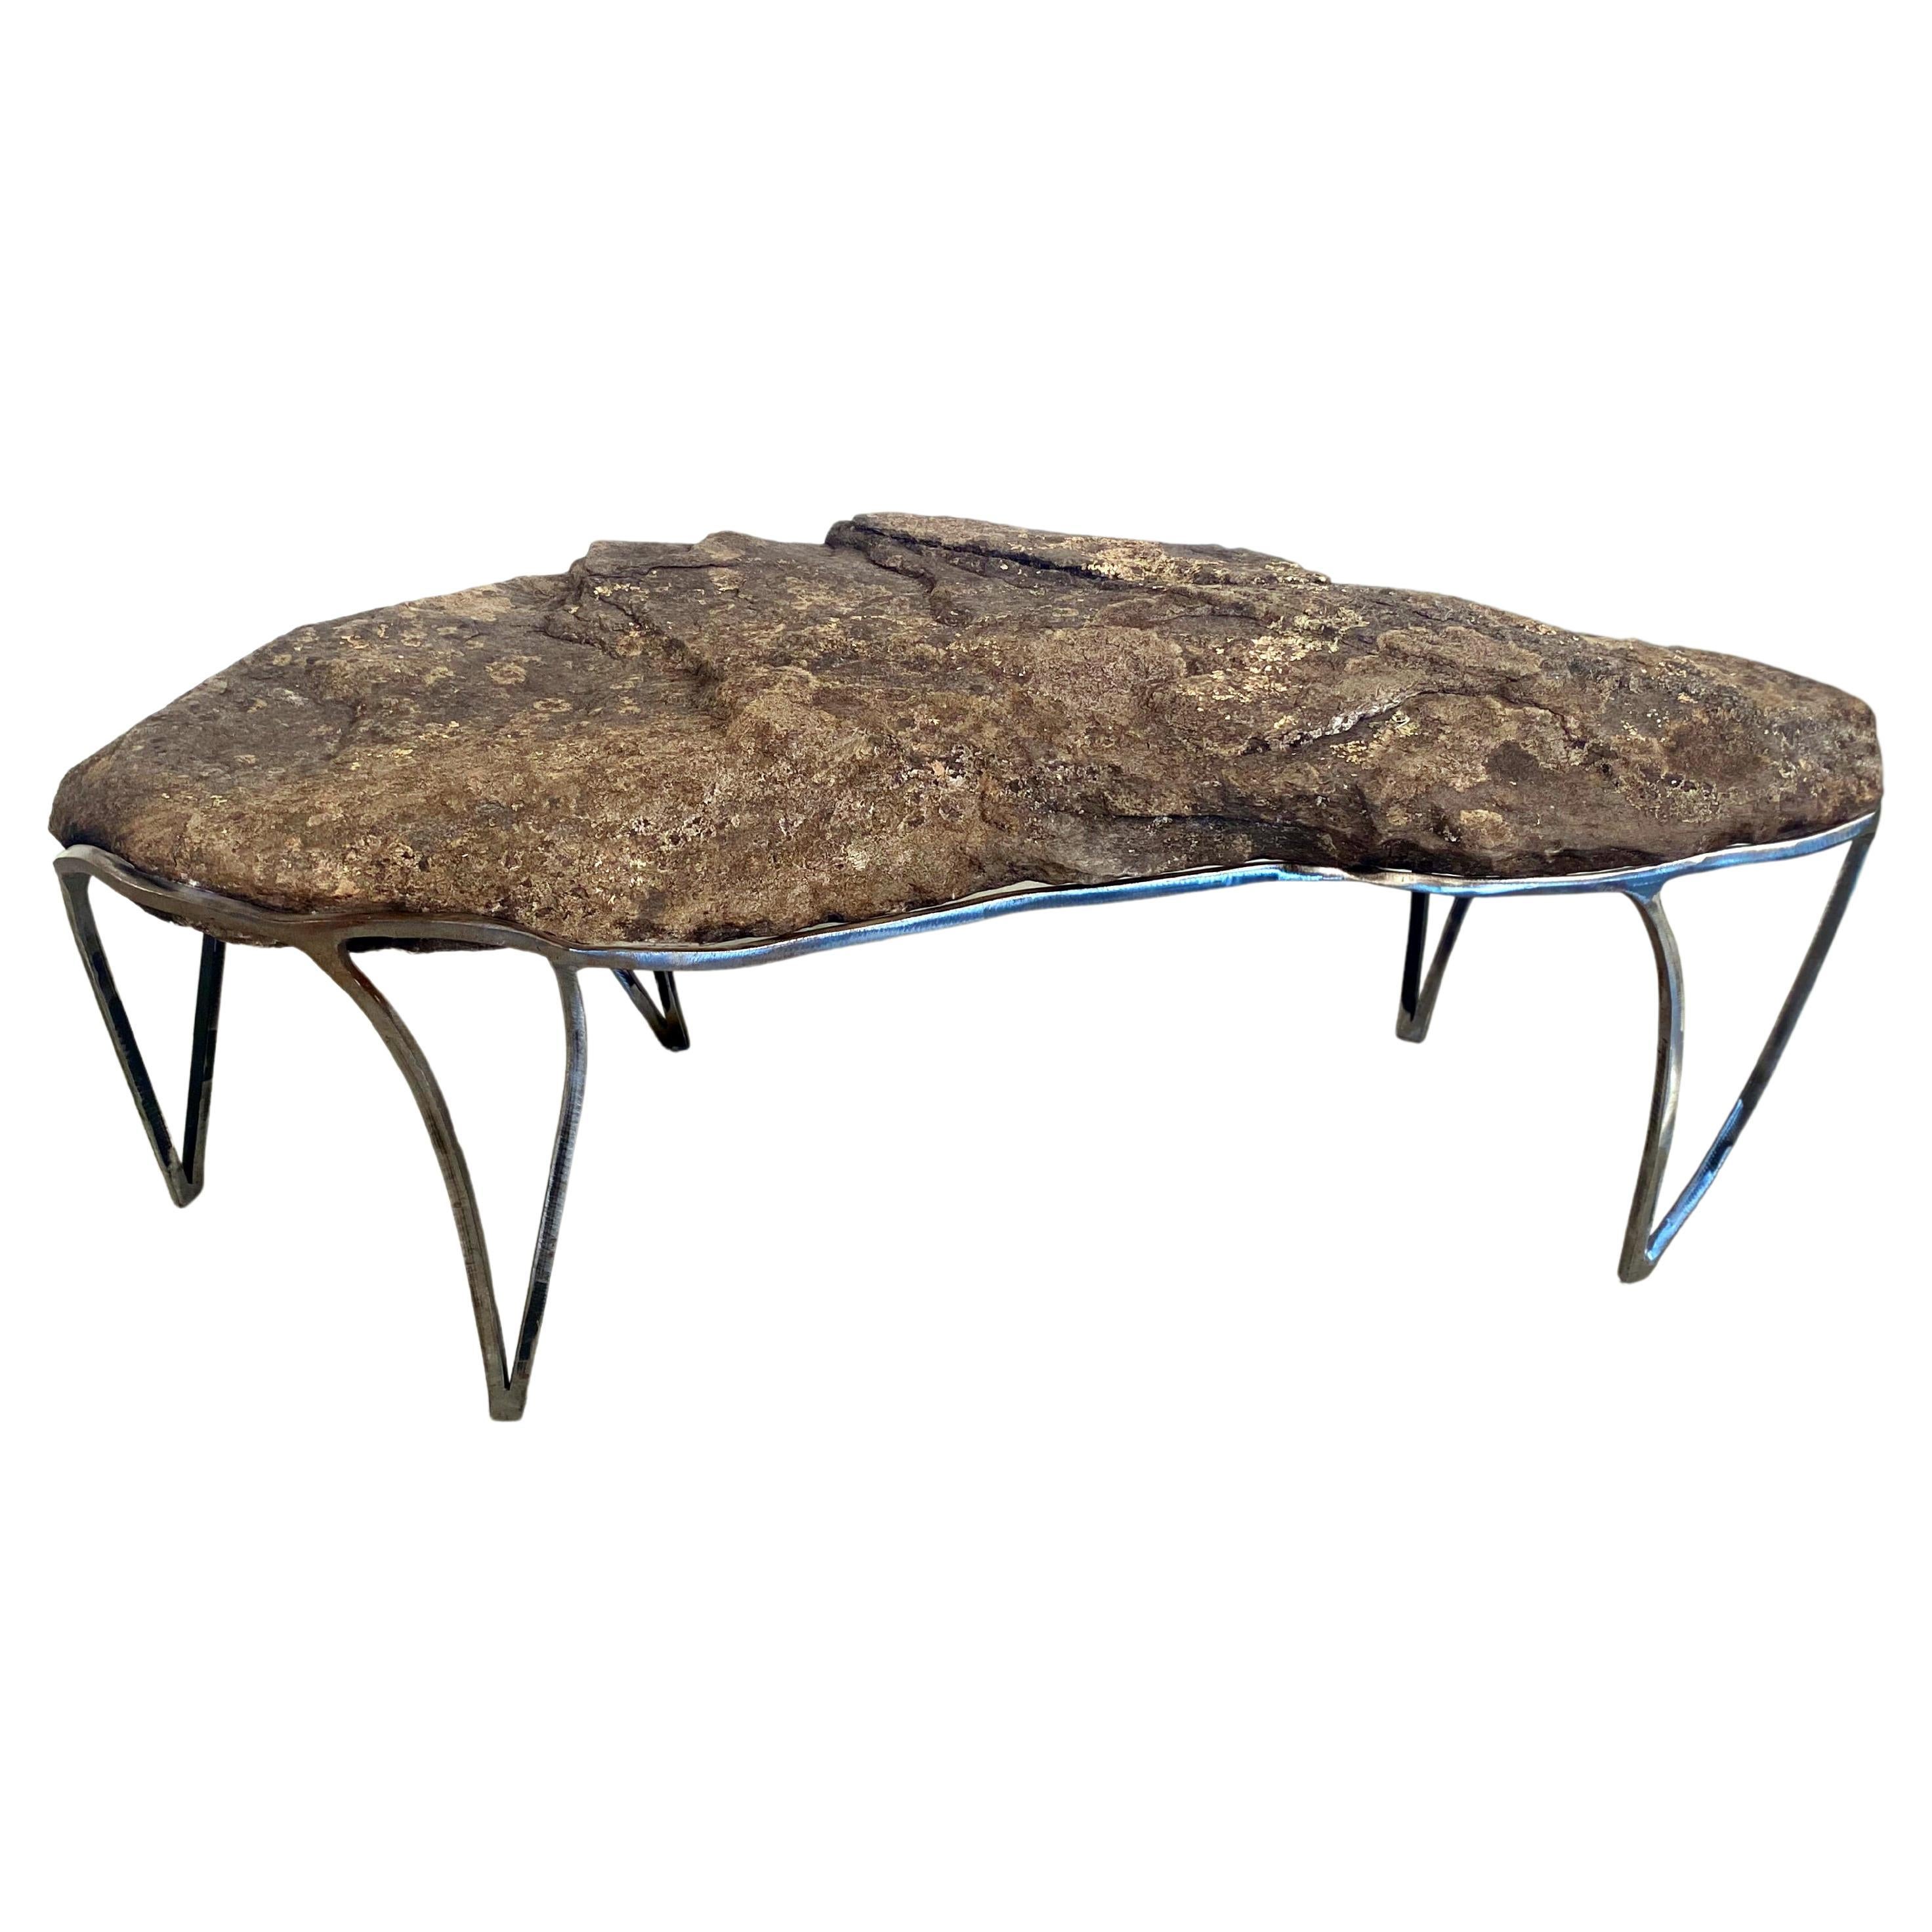 Rock Table No.6 by Quinn Morrissette, Natural Stone and Steel Coffee Table 